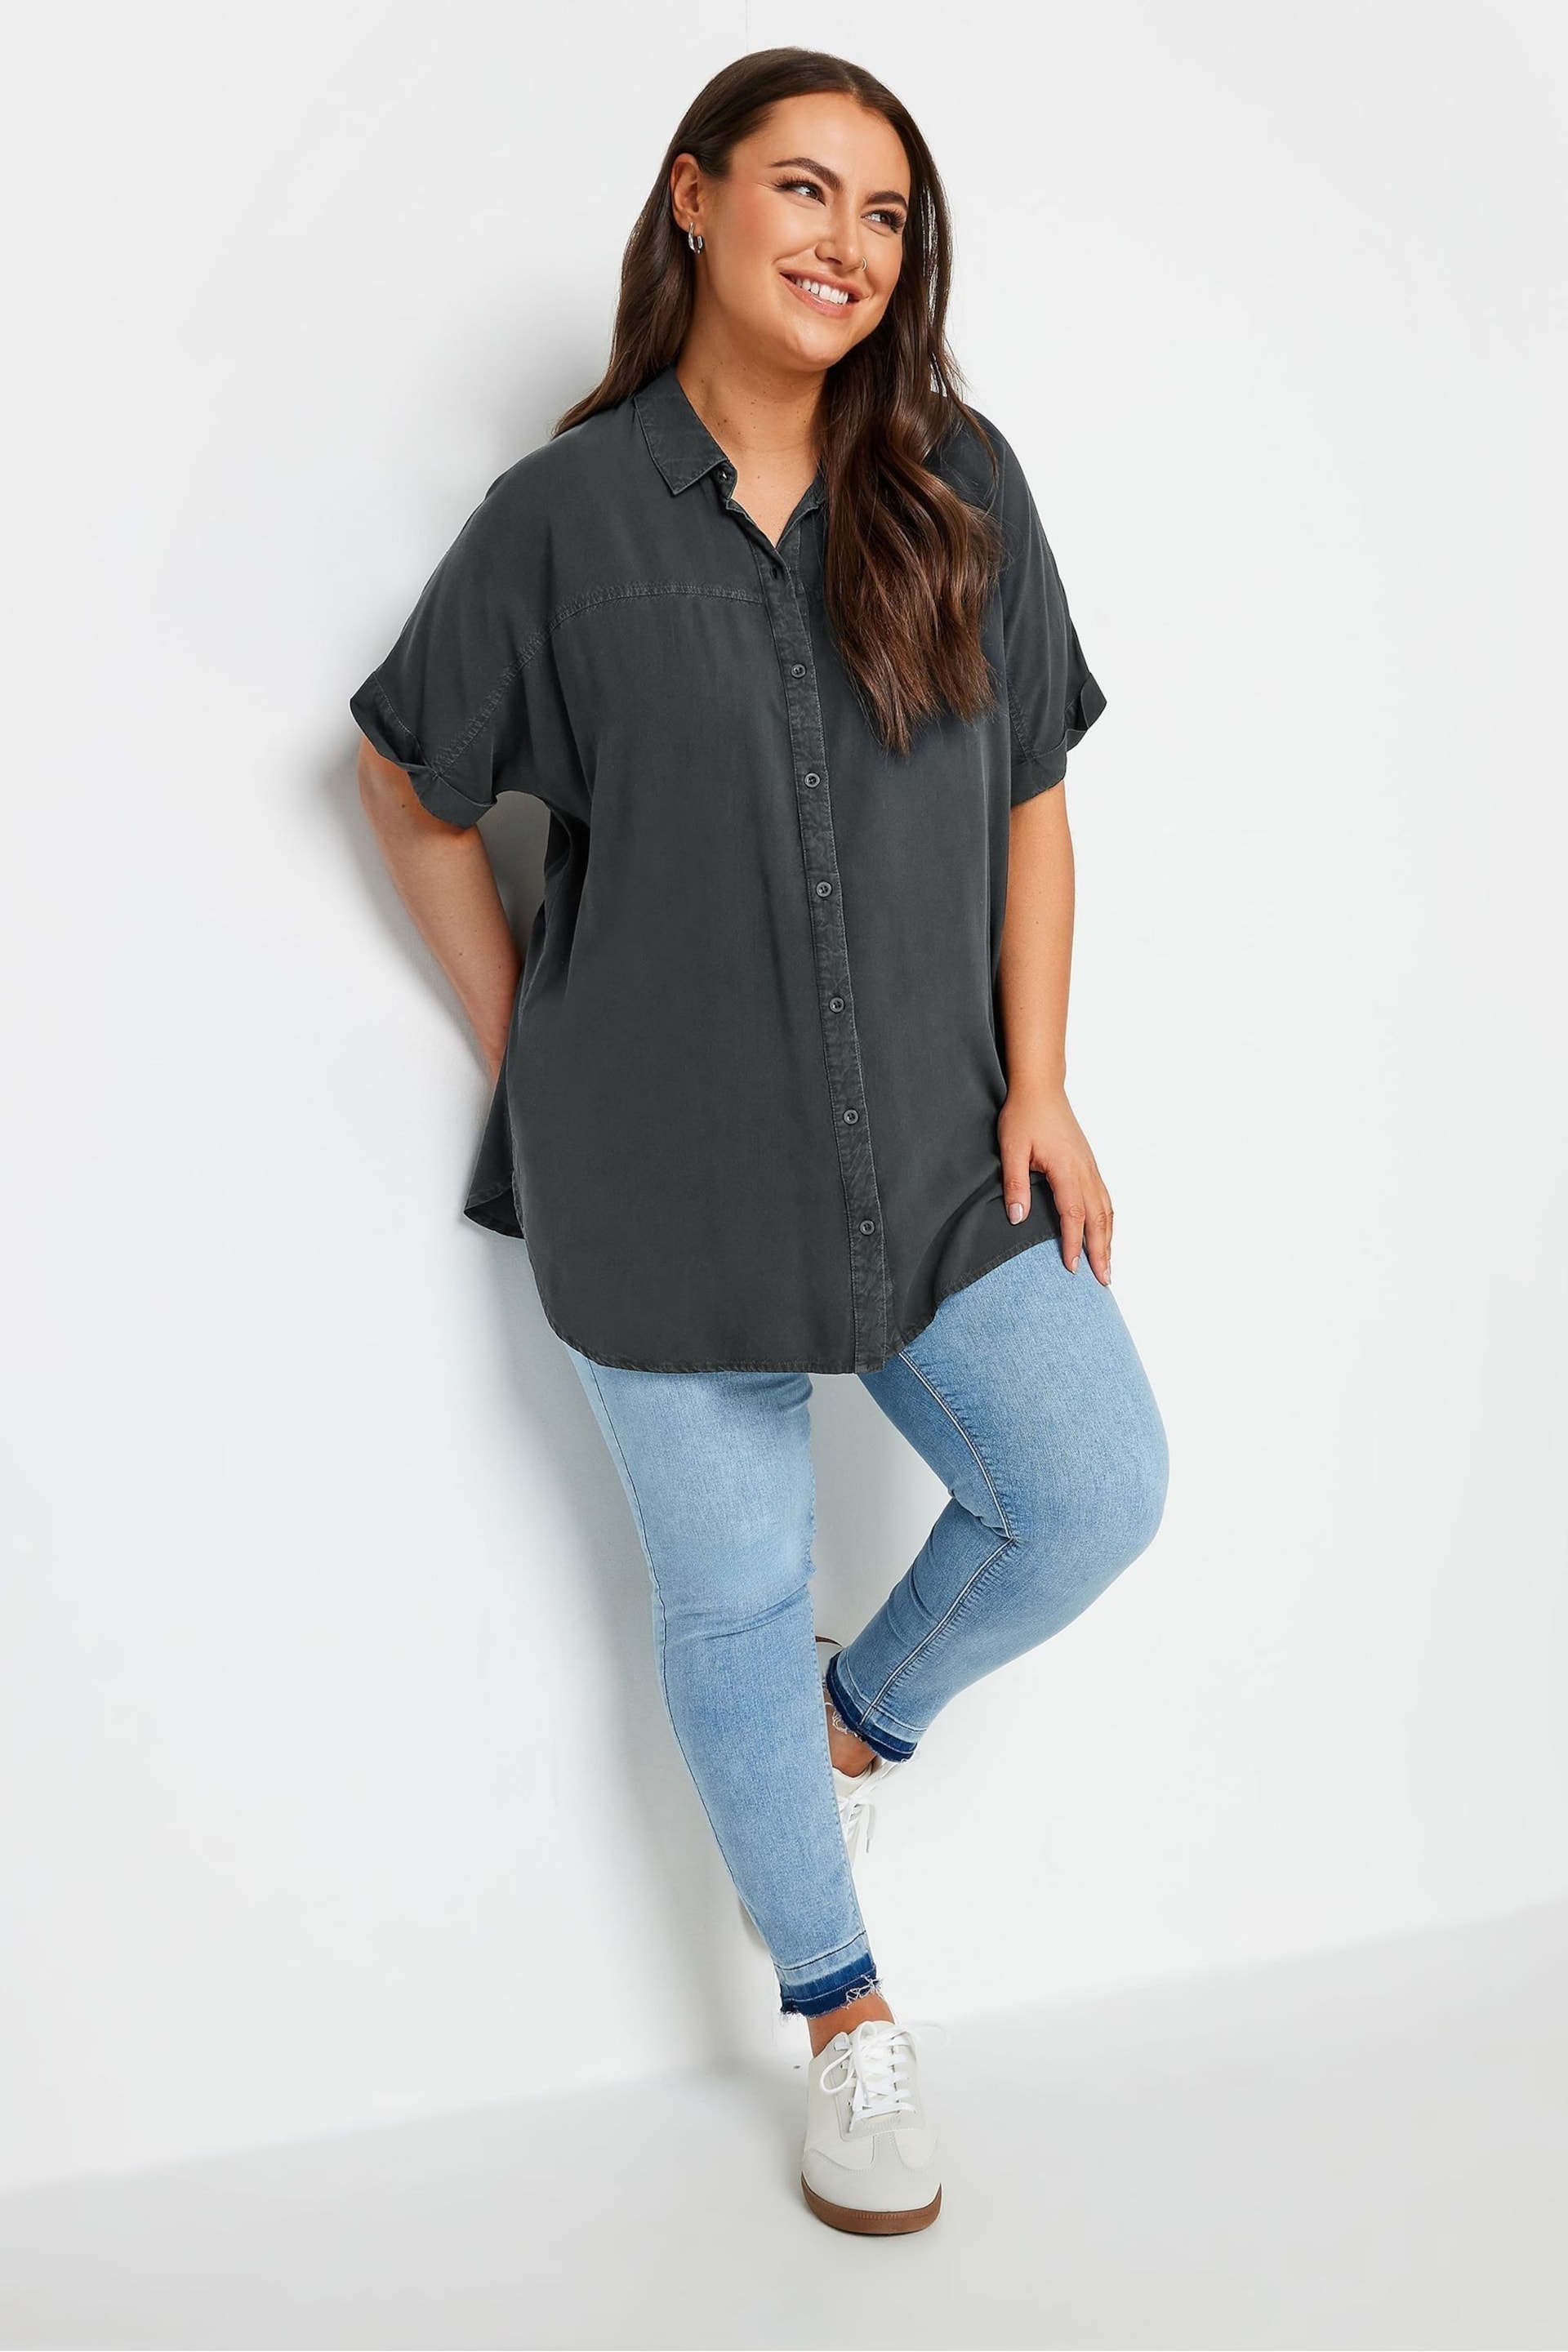 Yours Curve Black Chambray Shirt - Image 2 of 4